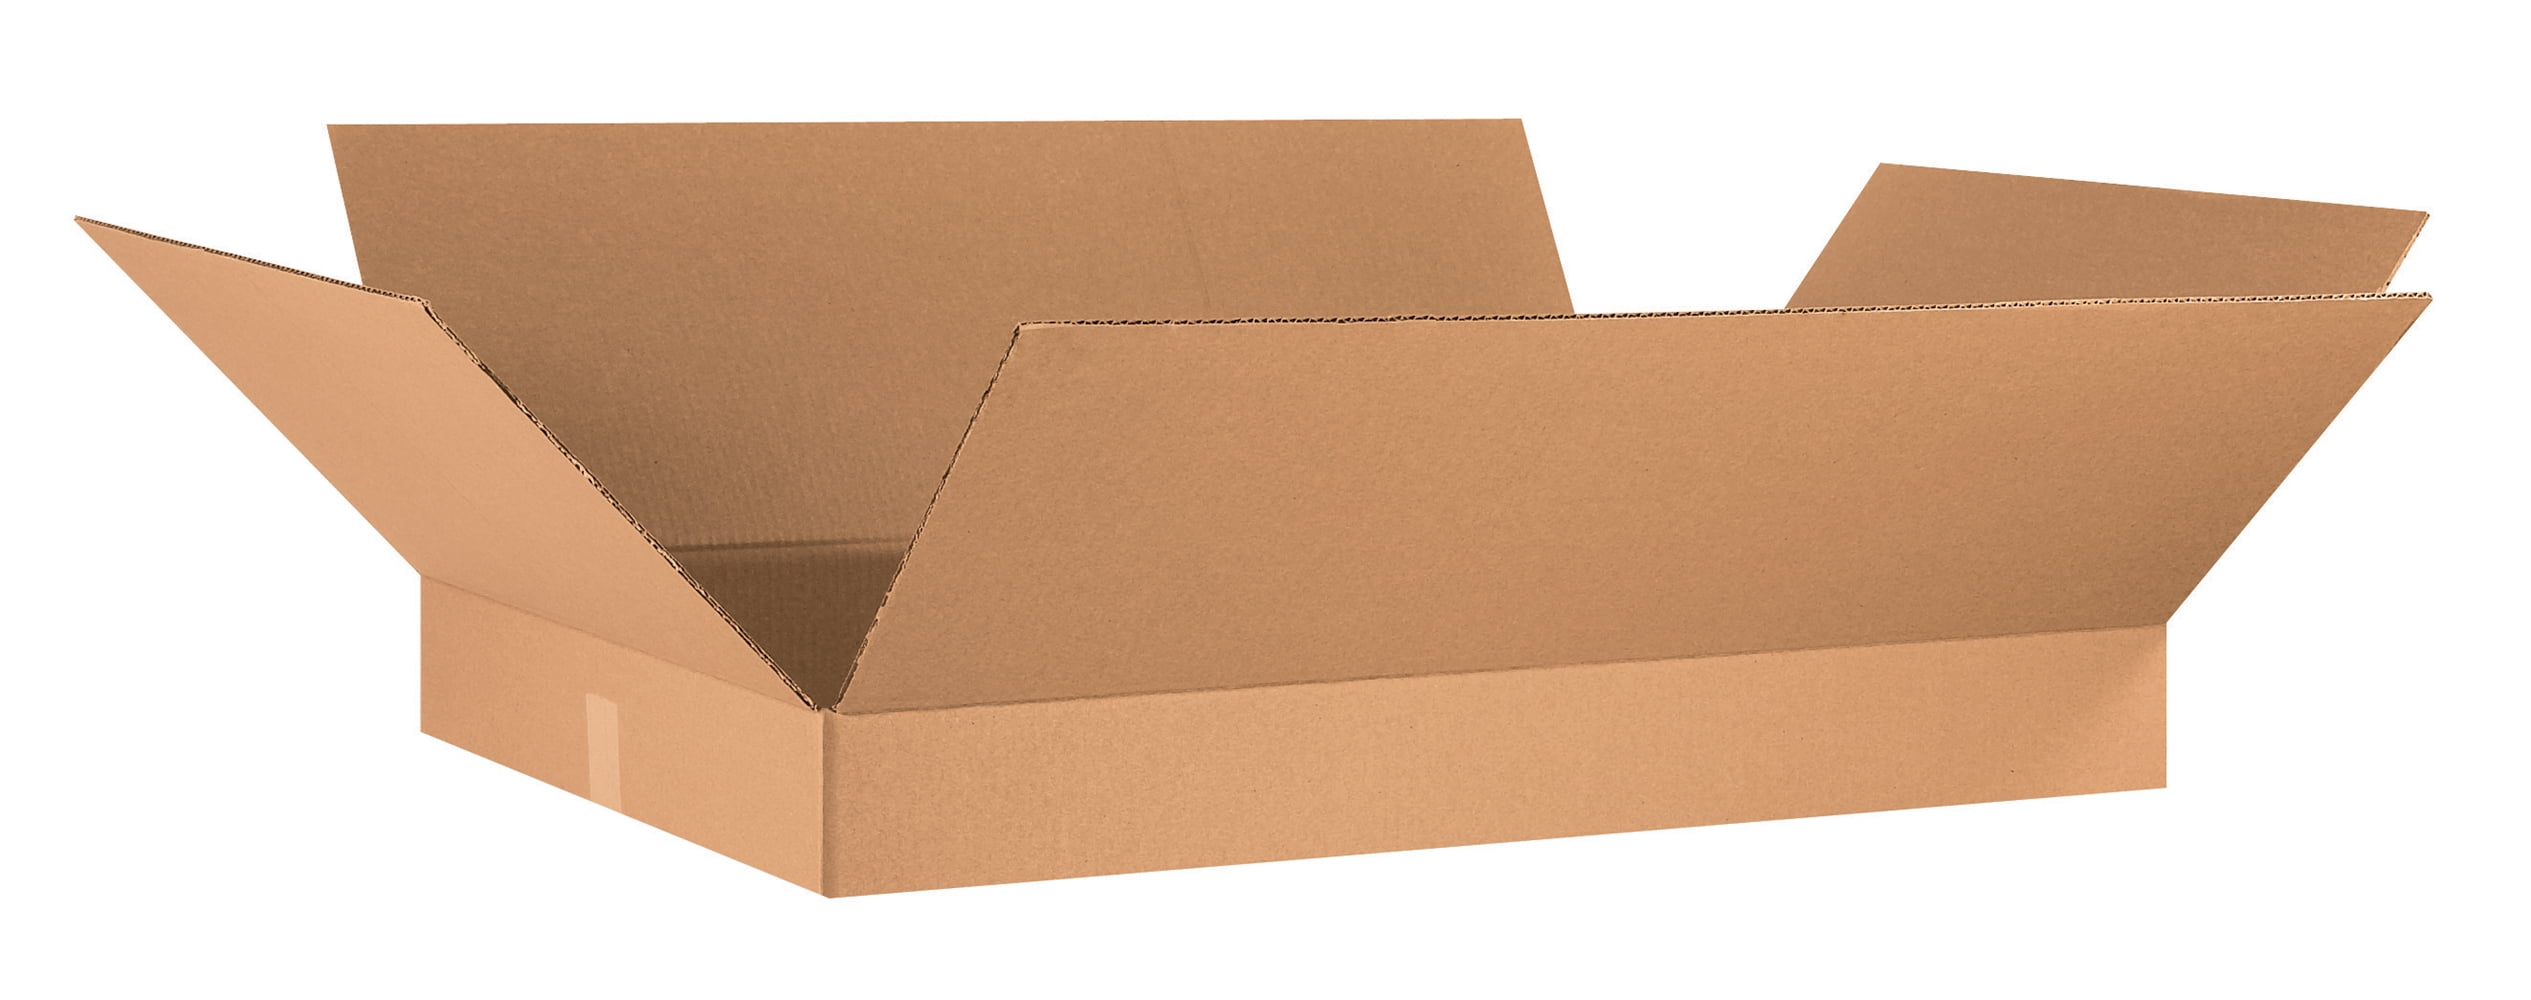 100 x Small Packaging Cardboard Boxes 4 x 4 x 4" SINGLE WALL cube